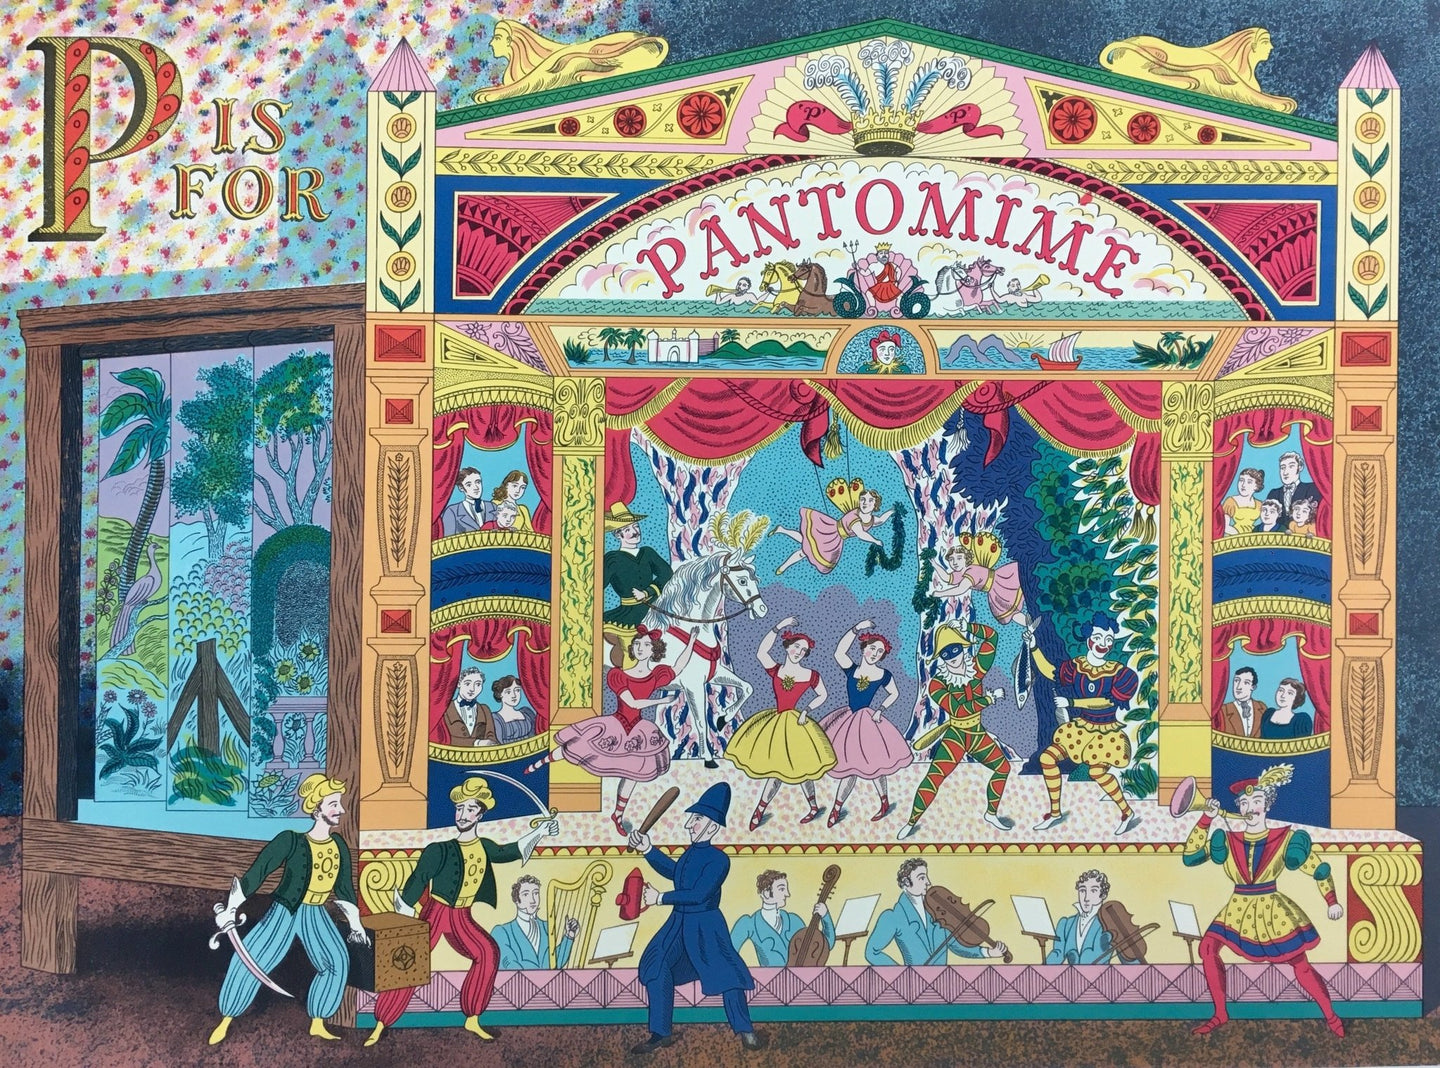 P is for Pantomime, an original print by Emily Sutton and the Penfold Press